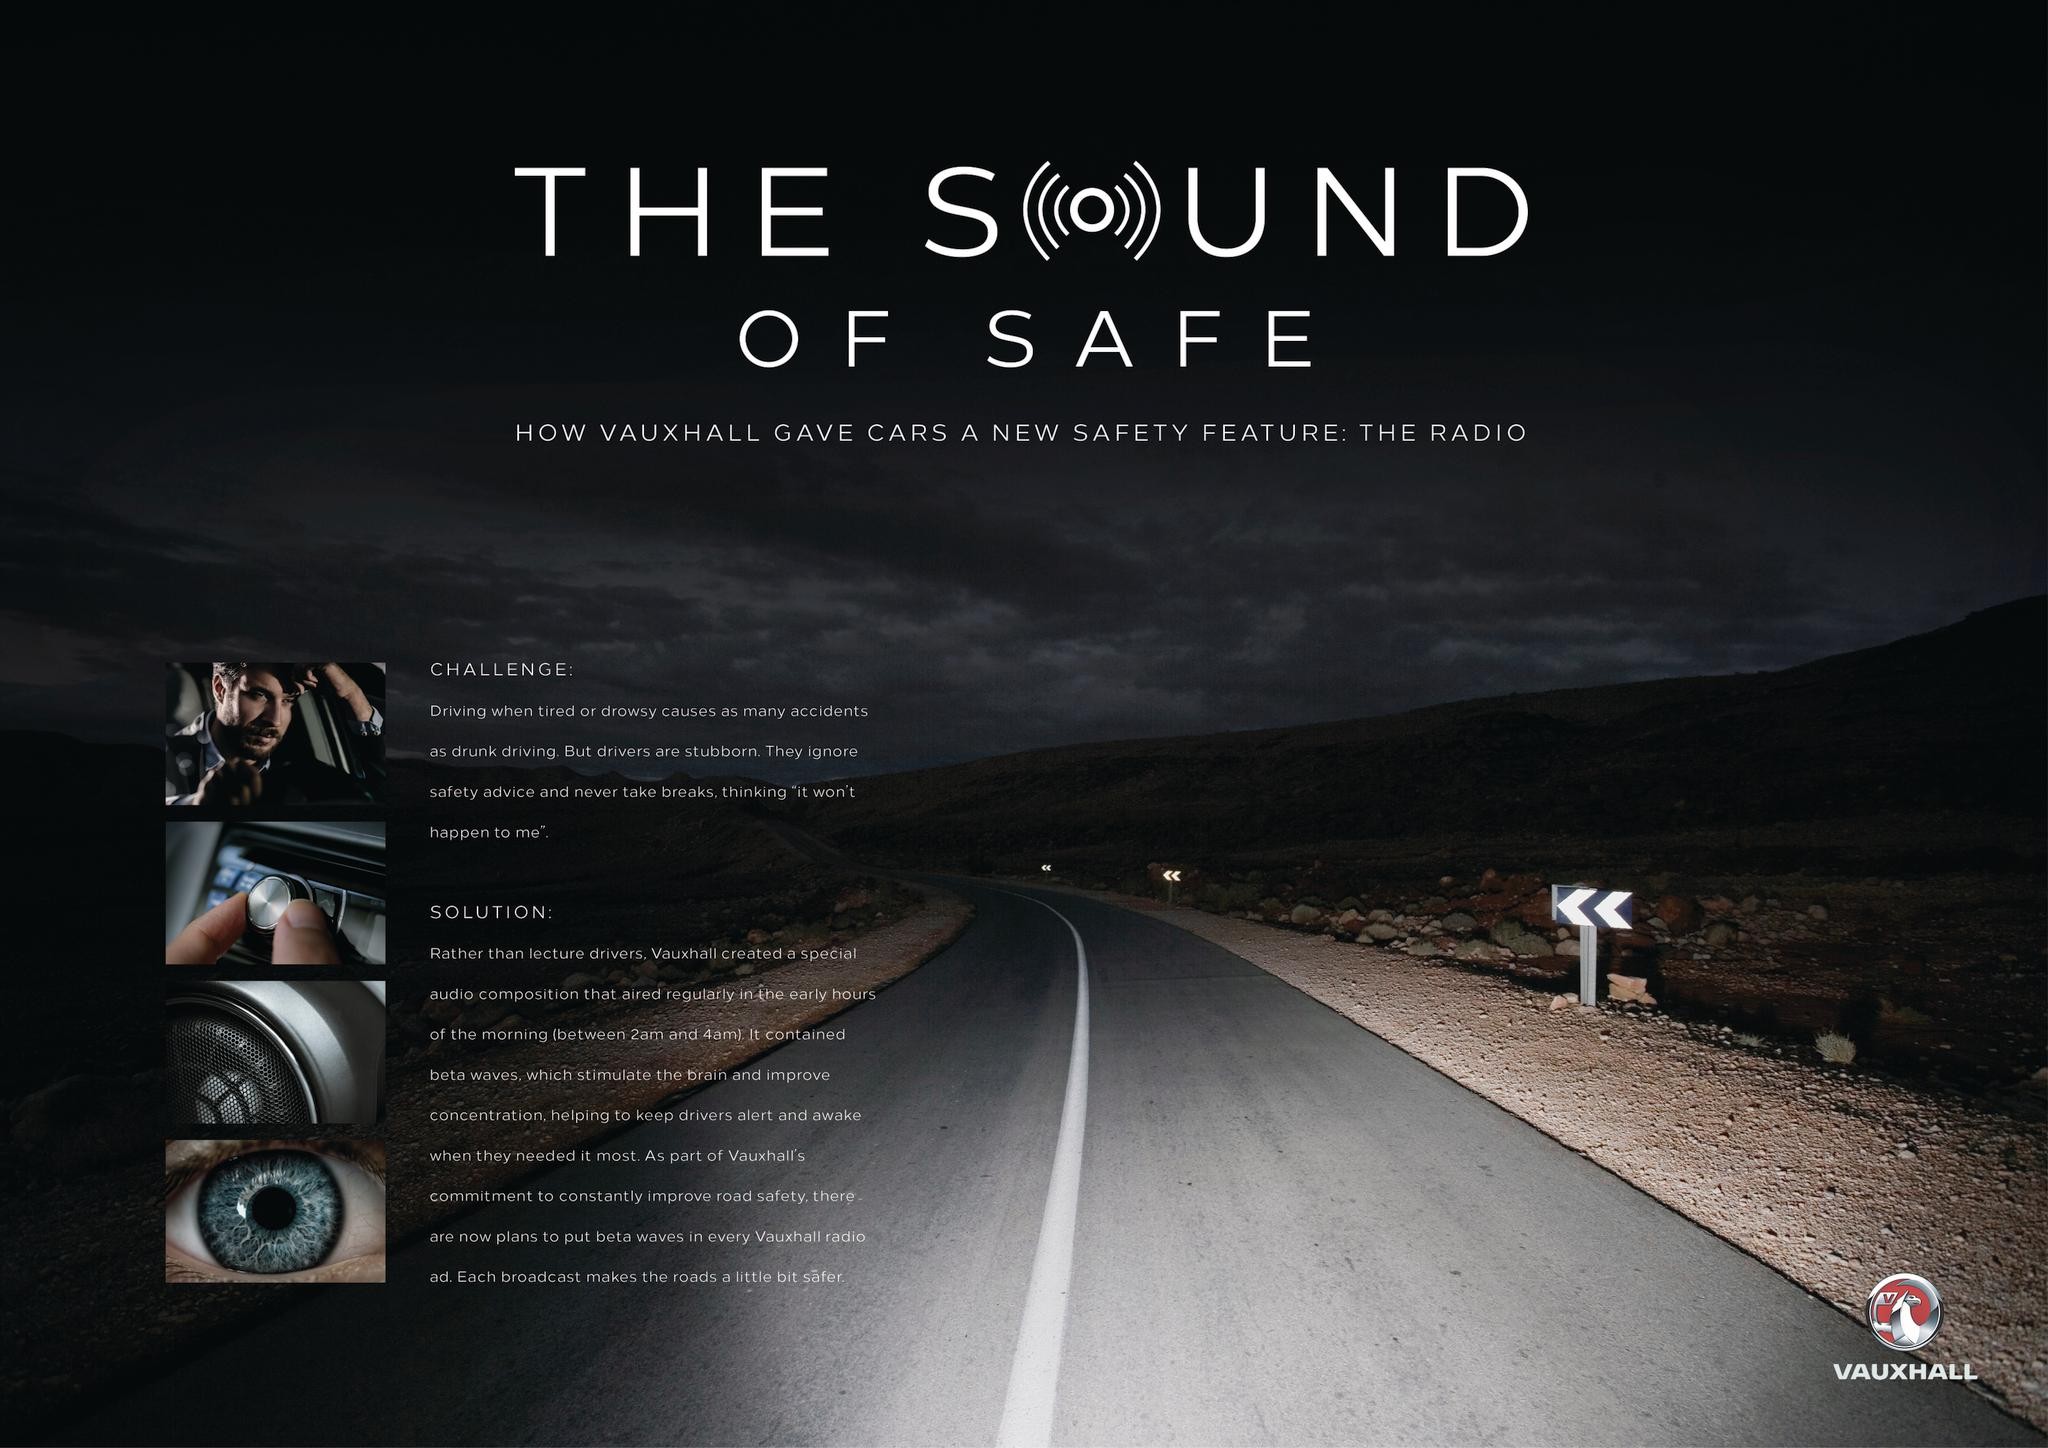 The Sound of Safe